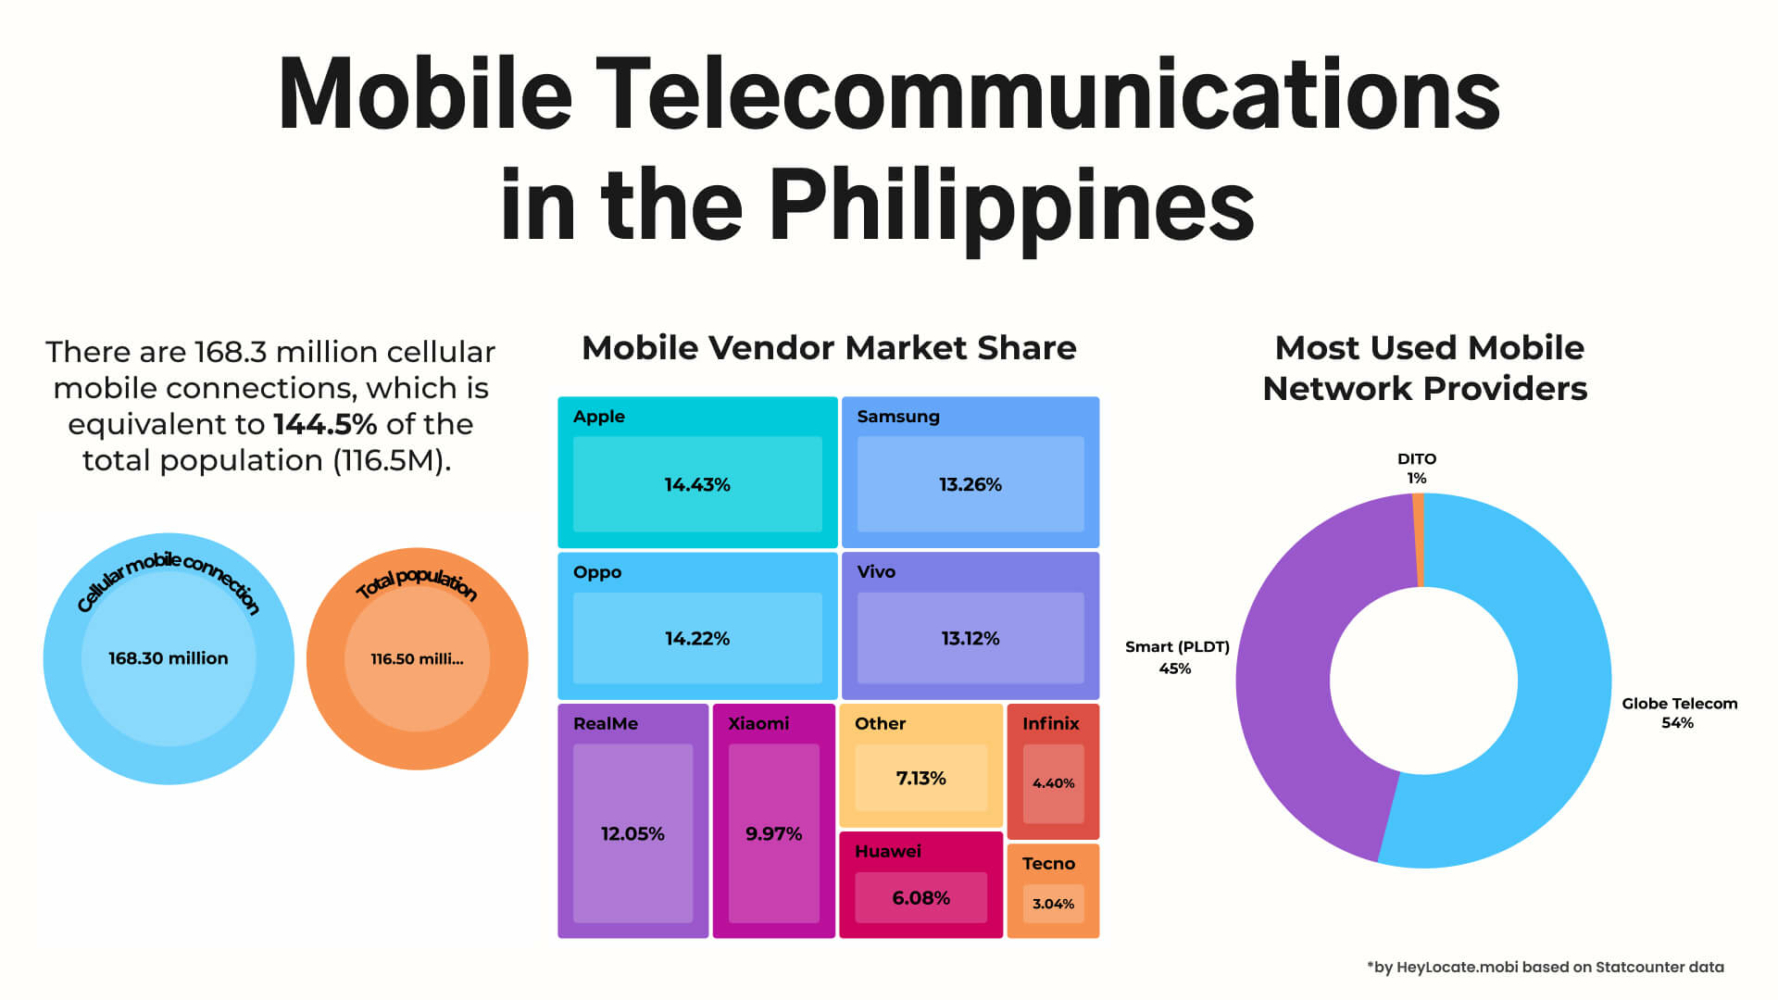 An infographic titled "Mobile Telecommunications in the Philippines" that illustrates mobile penetration, mobile vendor's market share percentage and the market share of mobile network providers, by HeyLocate.mobi based on Statcounter data.